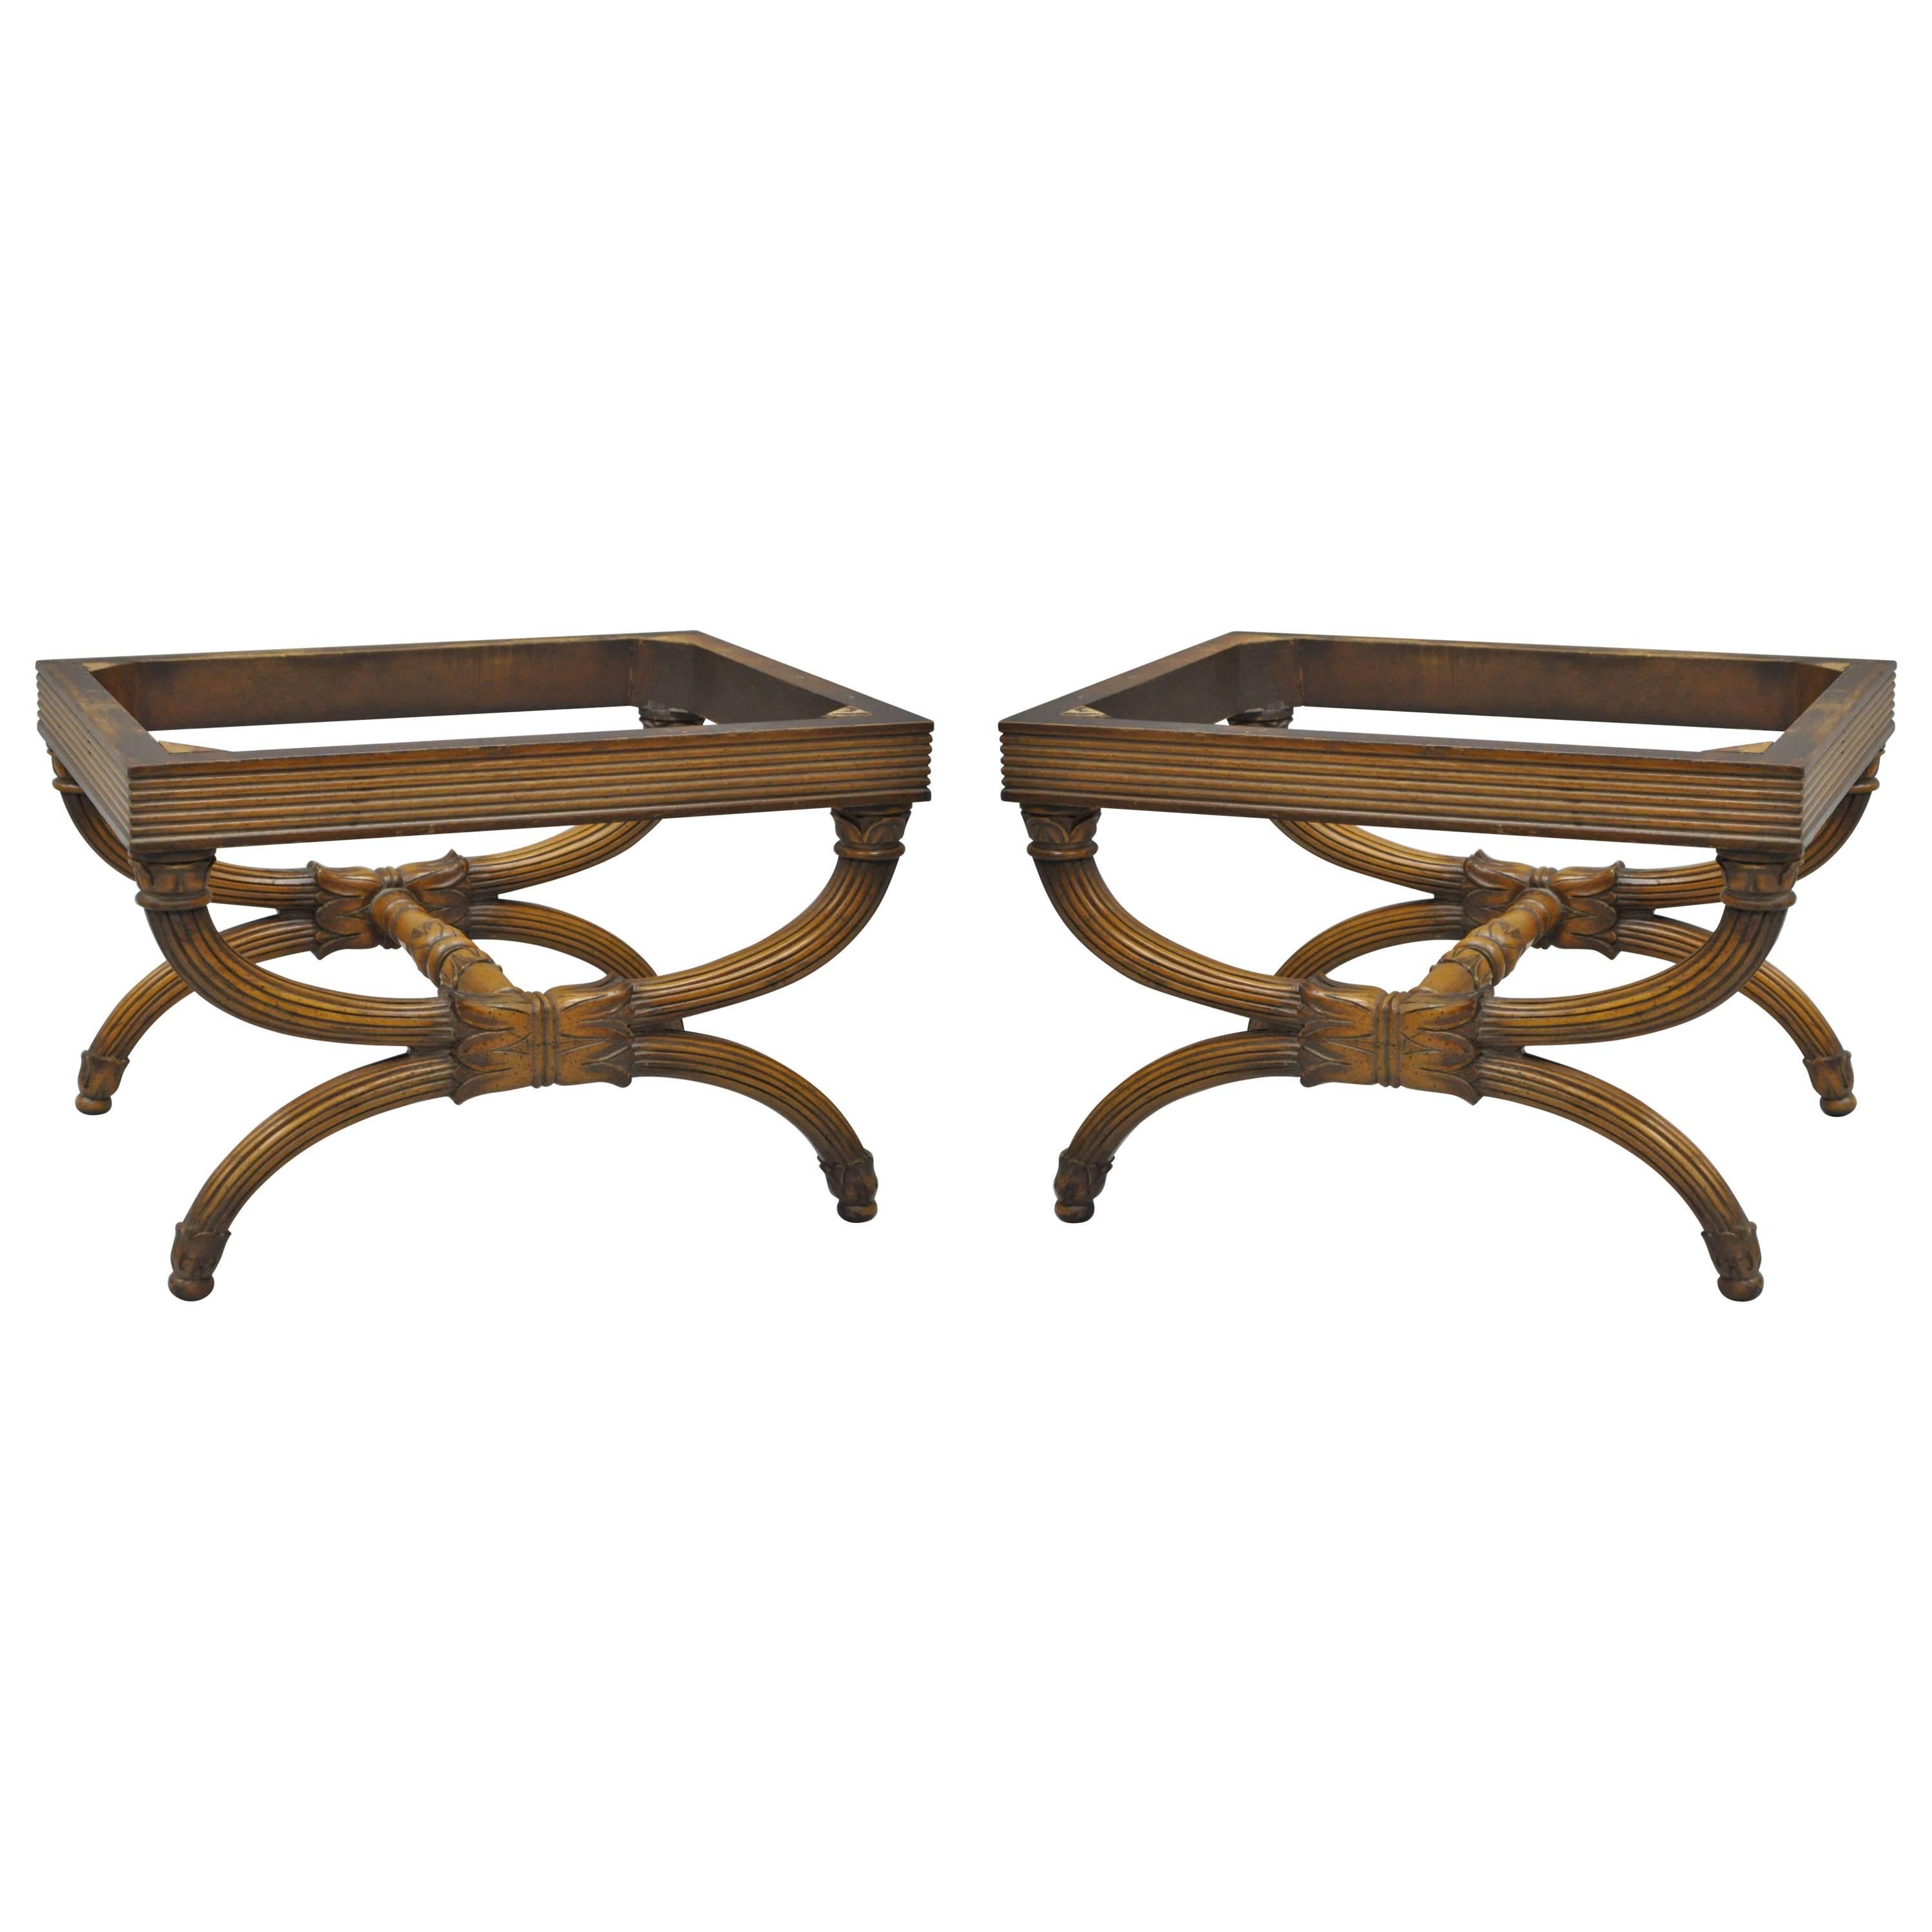 Pair of Carved Walnut French Neoclassical Style Curule X-Form Benches or Stools